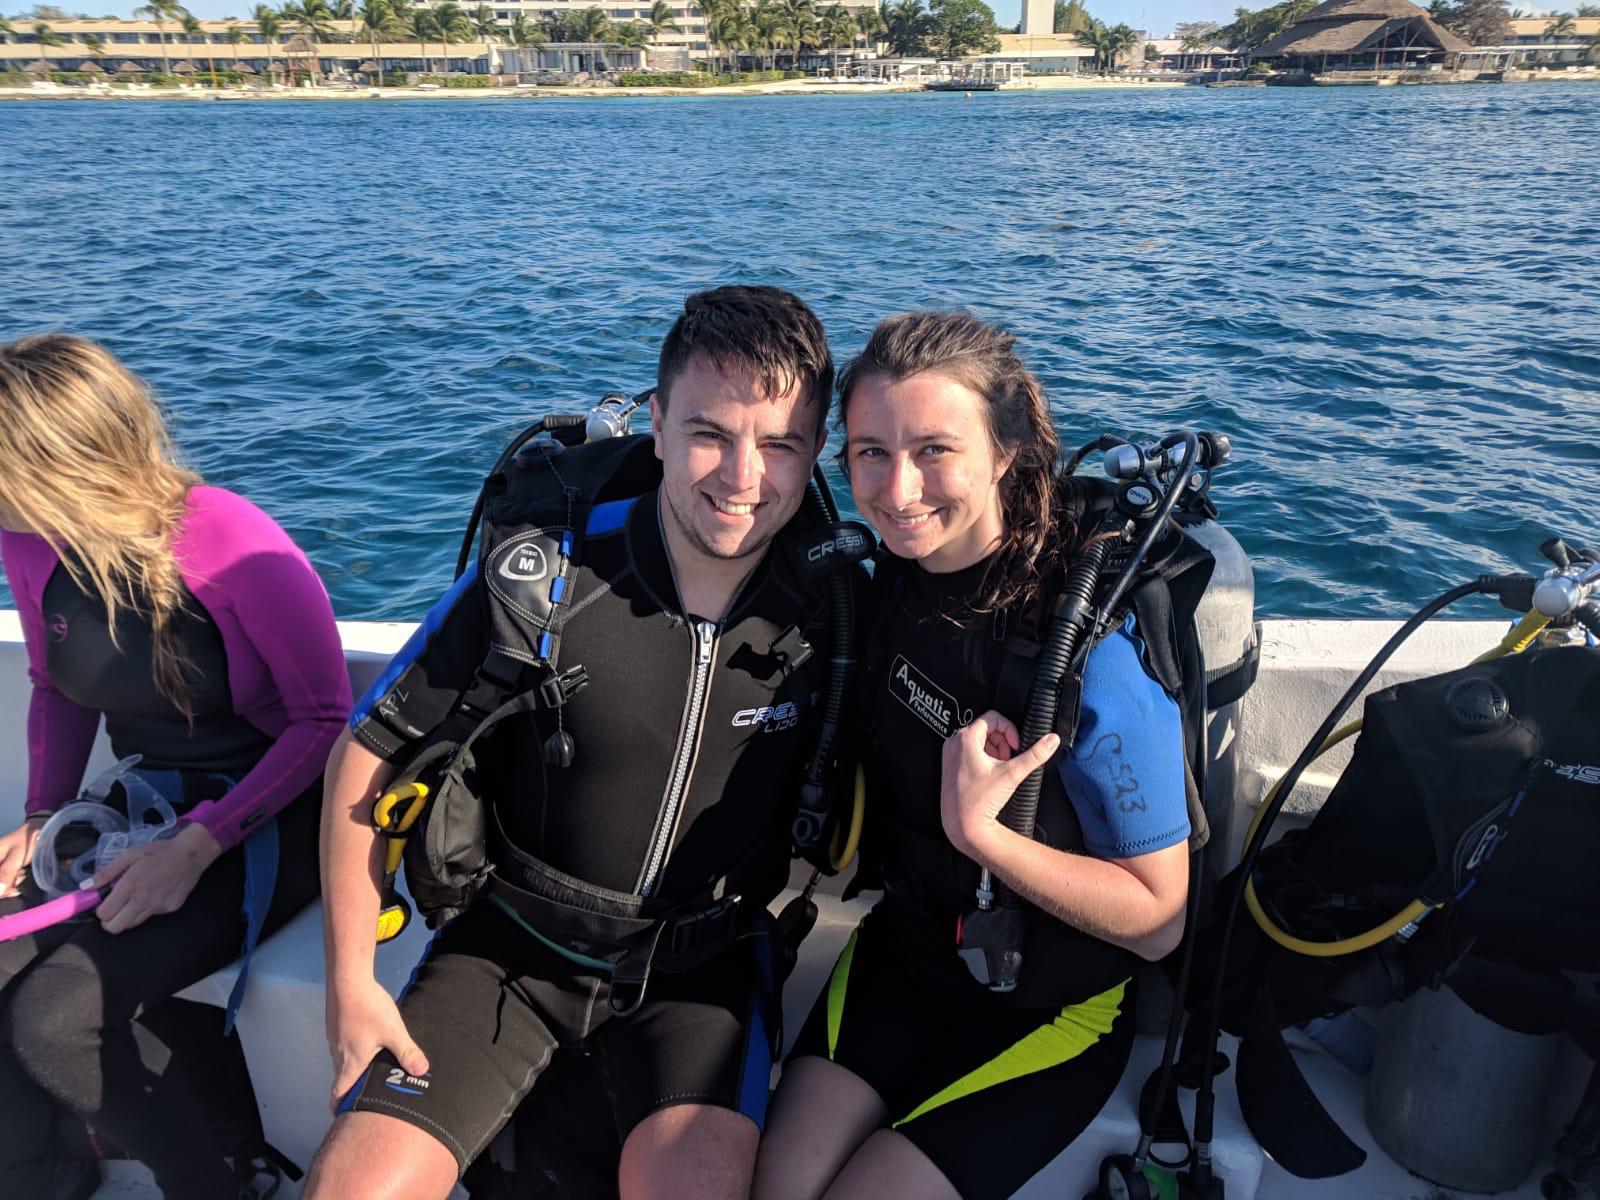 Every year for our anniversary rather than gifts, we learn a new skill. For 5 year anniversary we both got scuba certified and did our open water dives in Cozumel.